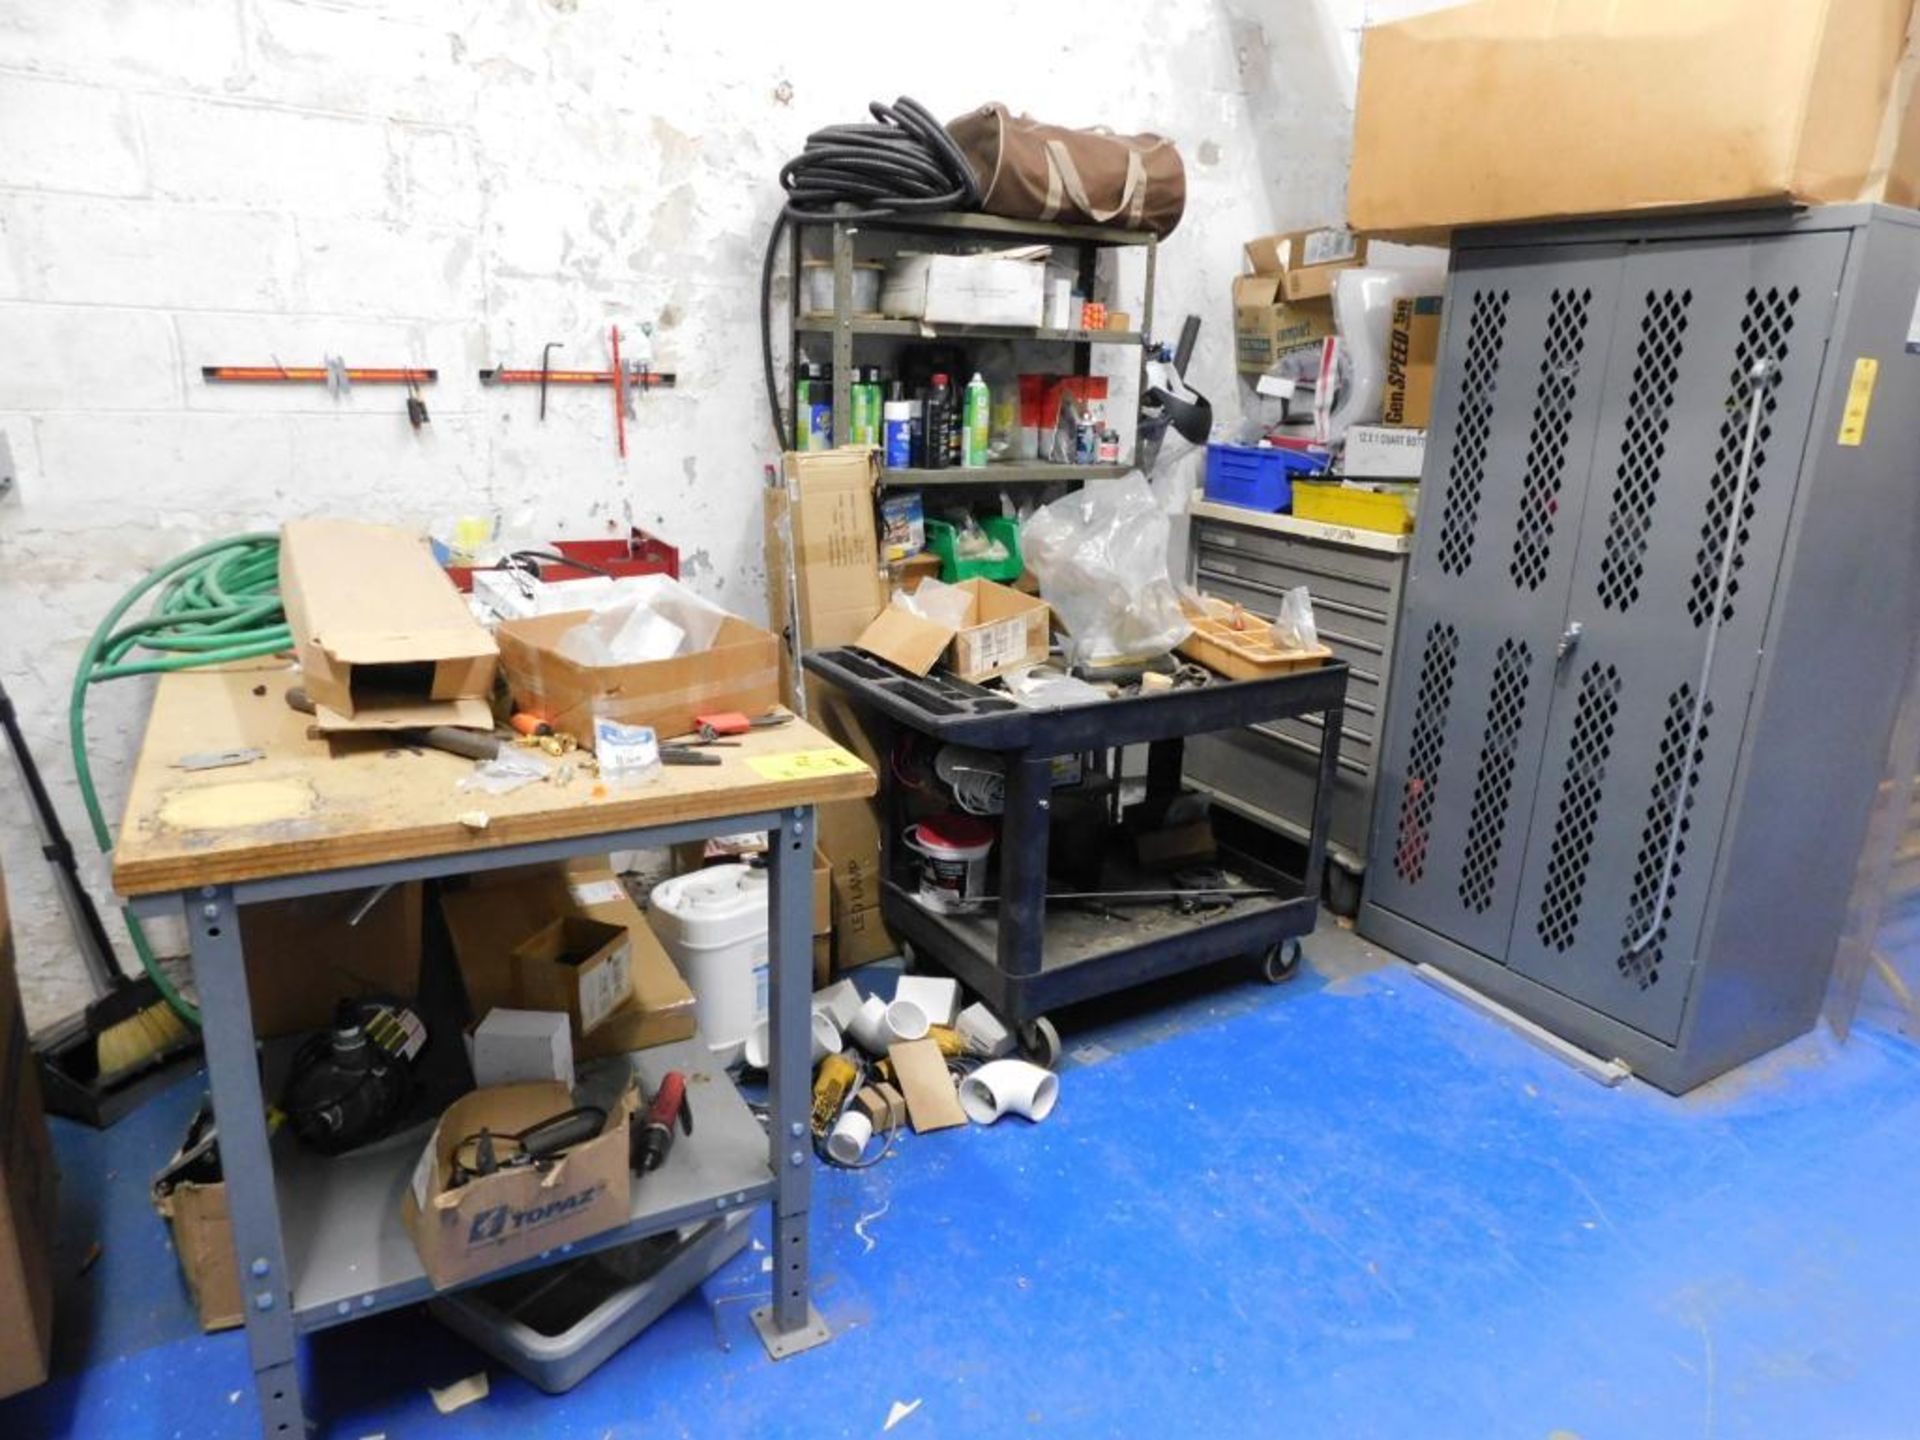 LOT: (3) Cabinets, (2) Shelving Units, Work Bench w/Contents of Wire, Electrical & Plumbing Accessor